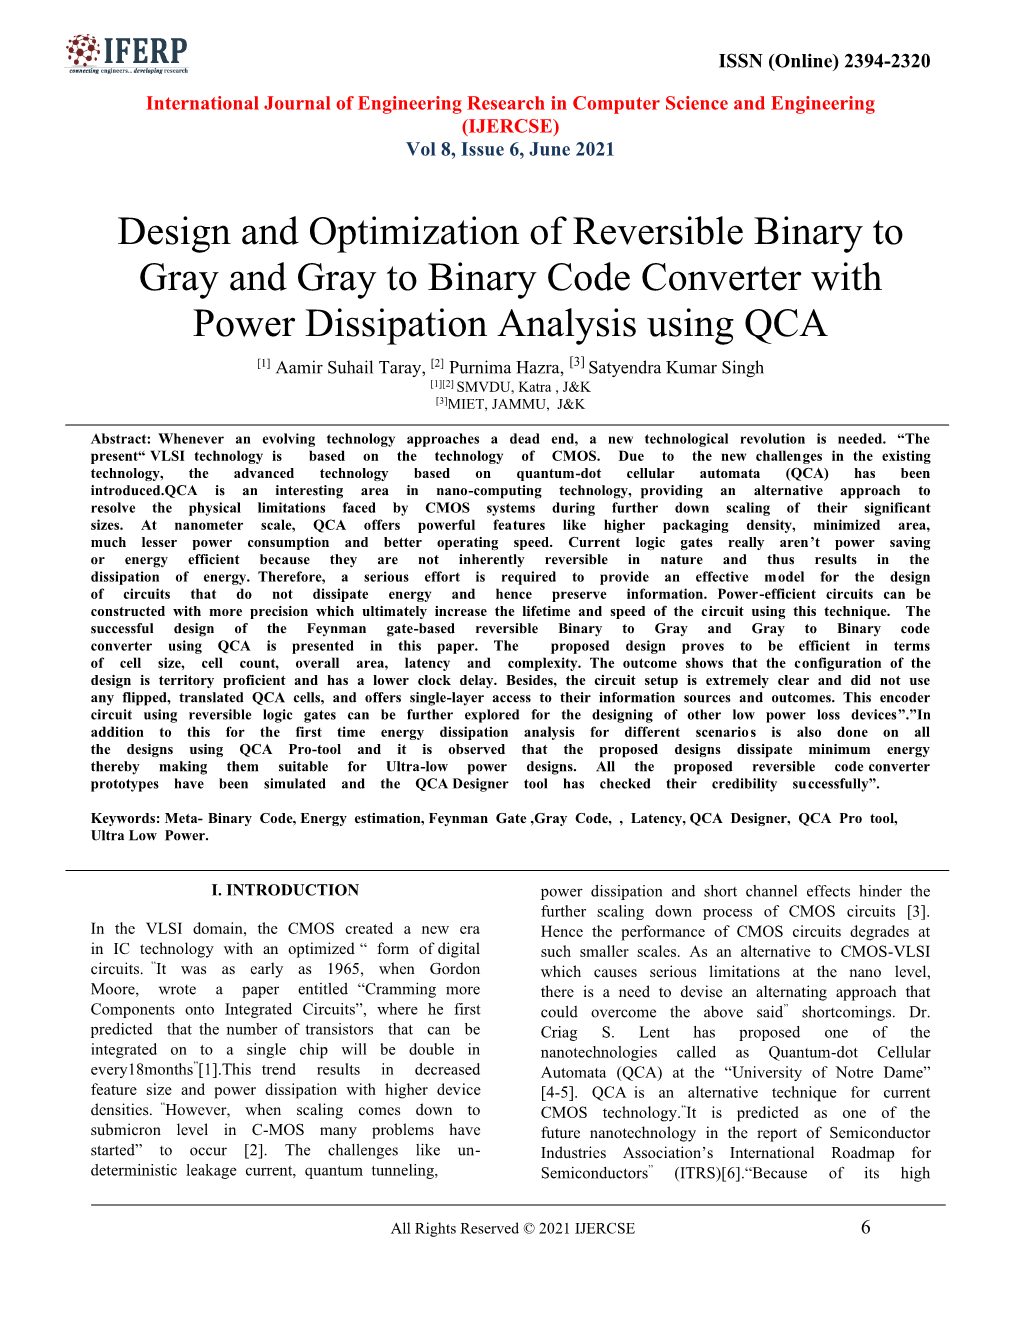 Design and Optimization of Reversible Binary to Gray And